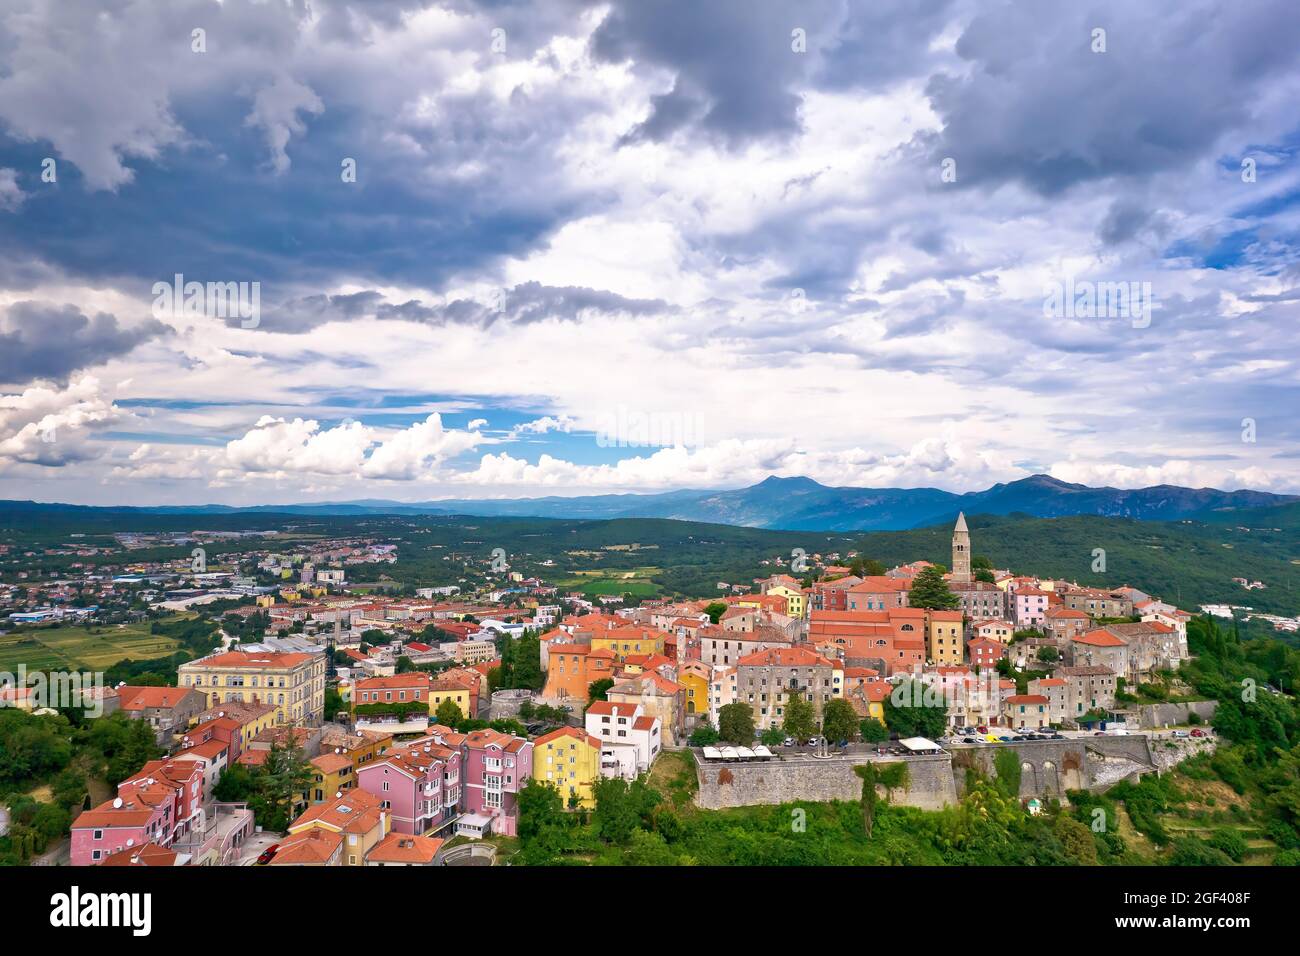 Historic town of Labin on picturesque hill aerial view, Istria region of Croatia Stock Photo